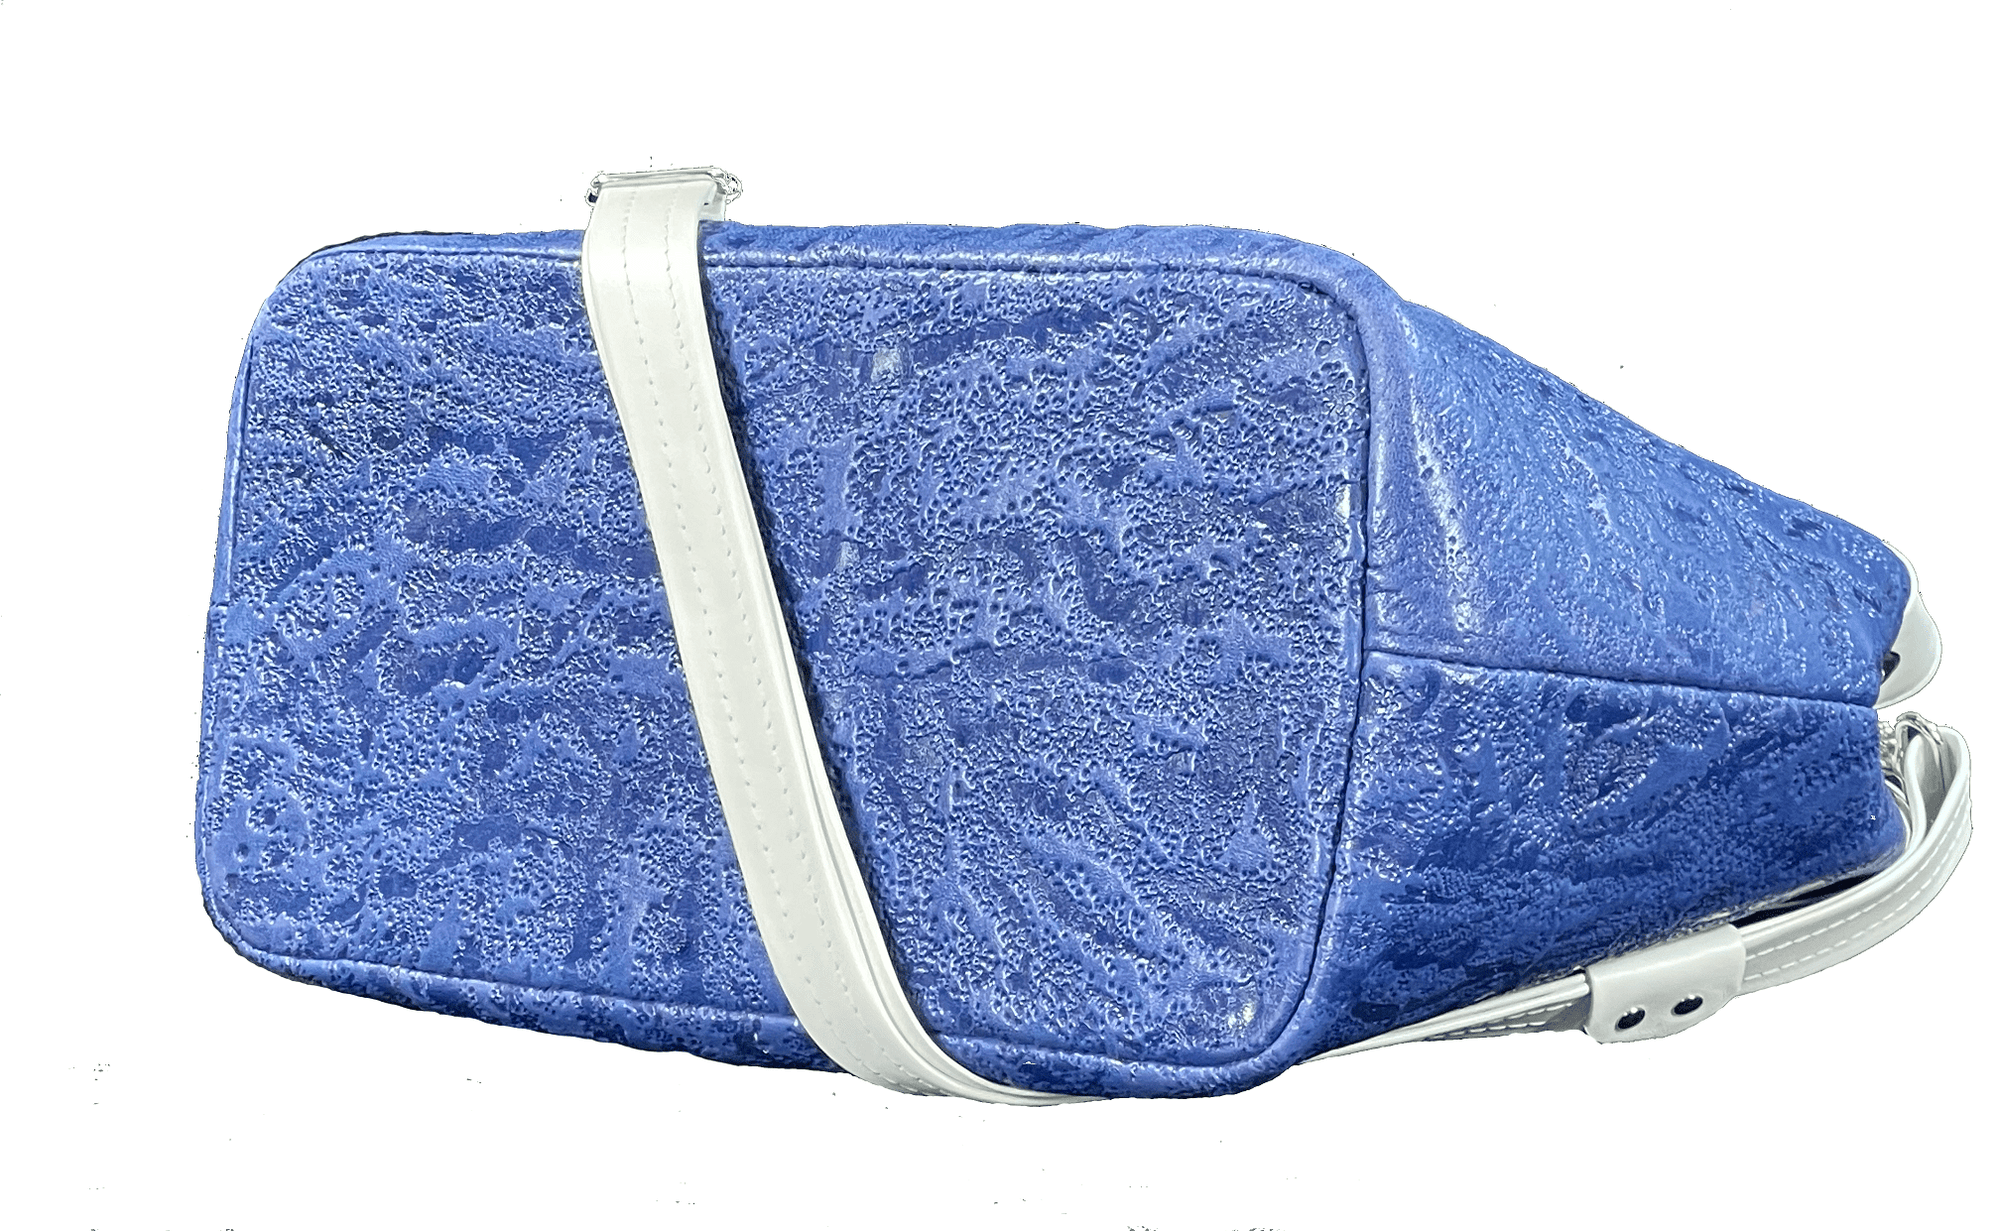 Fifth Avenue Blue and White Leather Satchel bottom view